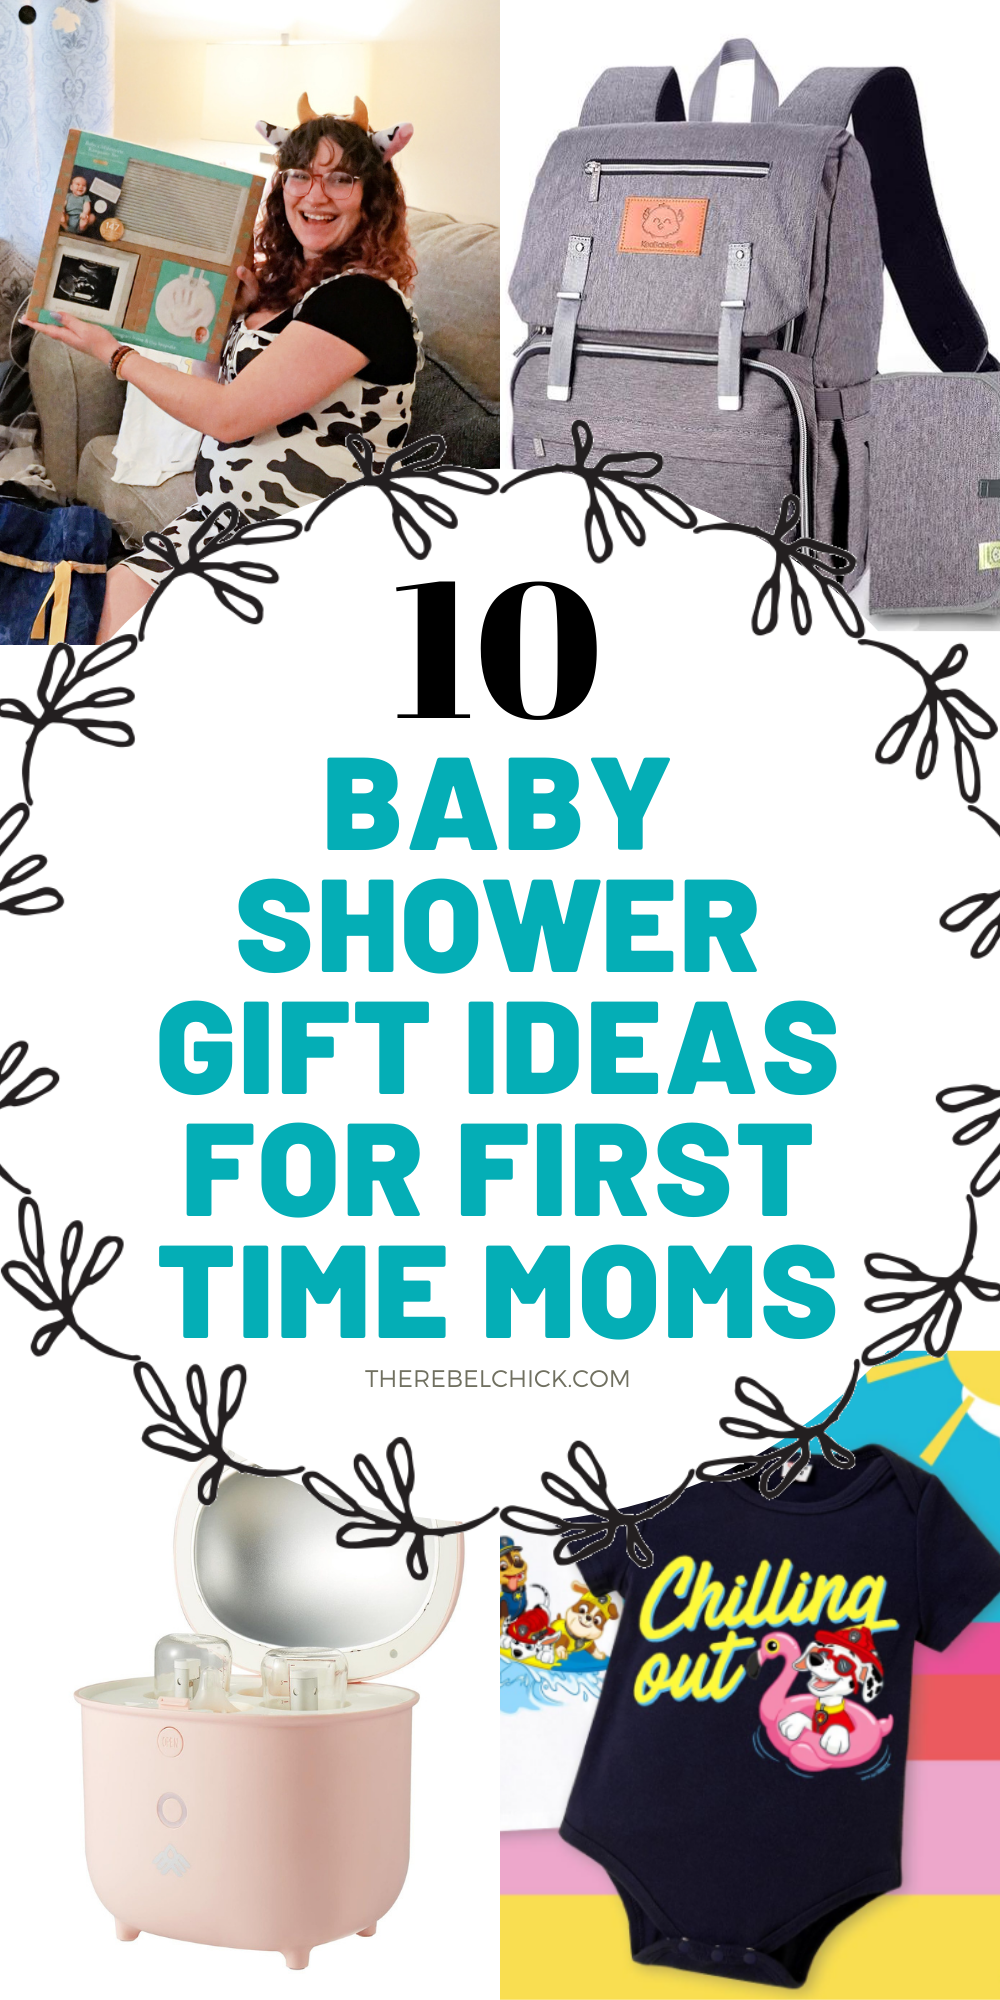 10 Baby Shower Gift Ideas for First Time Moms